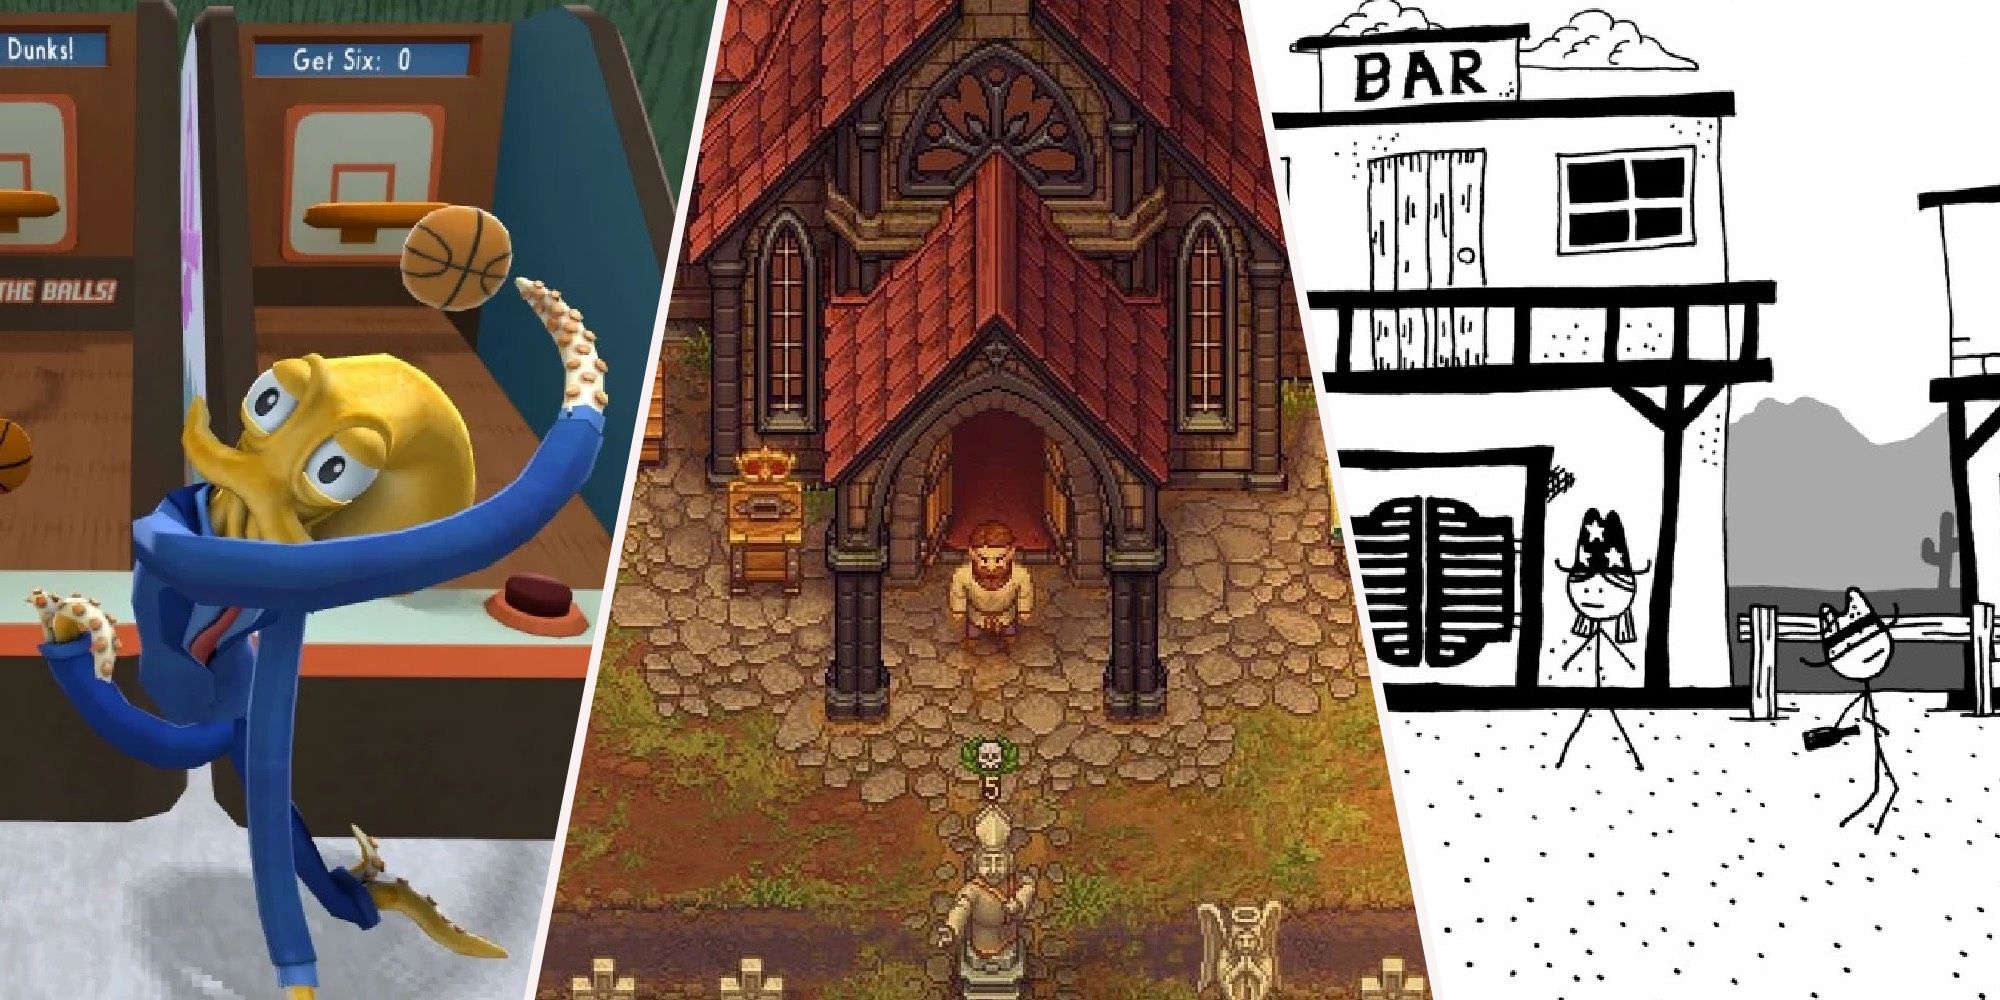 Three part image with Octodad shooting a basketball, graveyard keeper in front of the church, and stick figures from West of Loathing